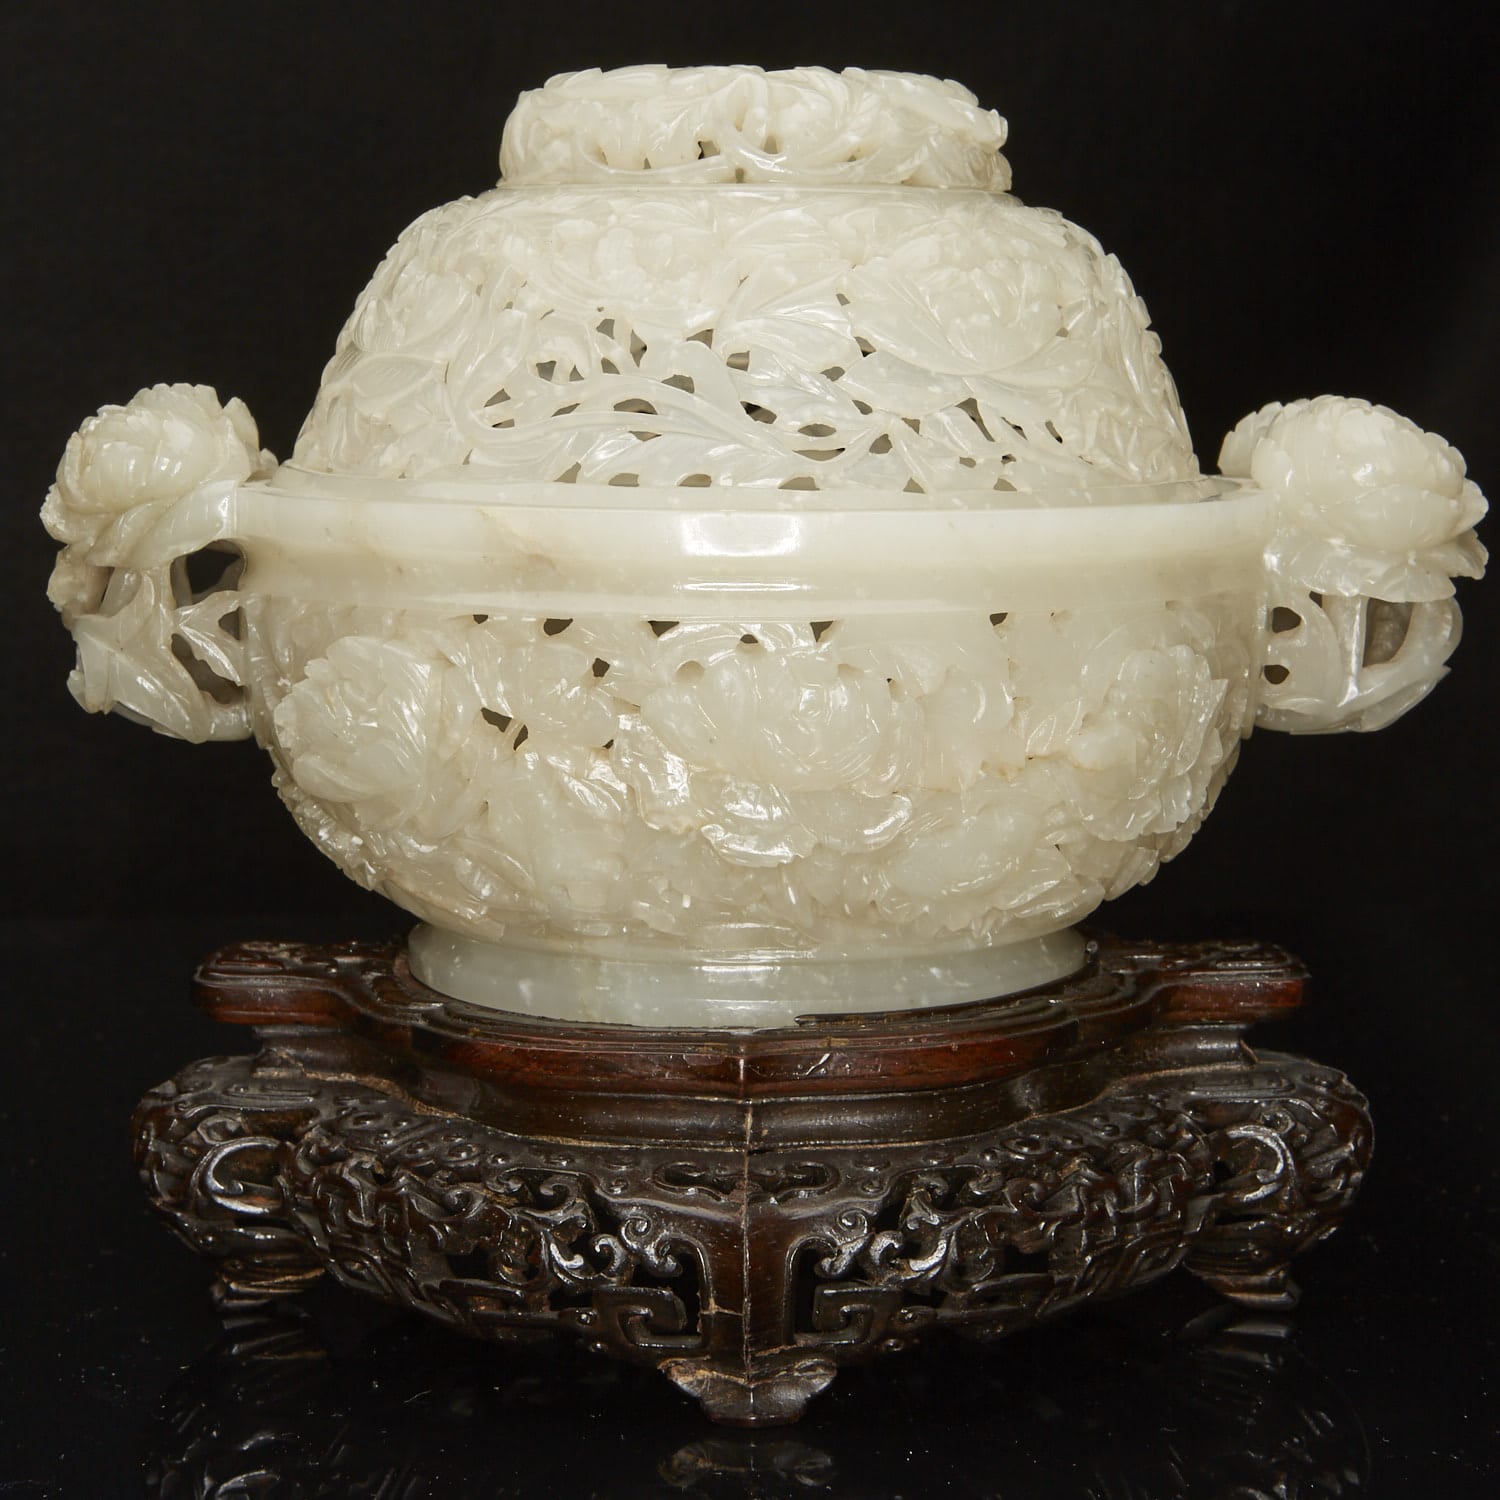 Lot 179: 18th c. Chinese Reticulated Jade Censer with Stand